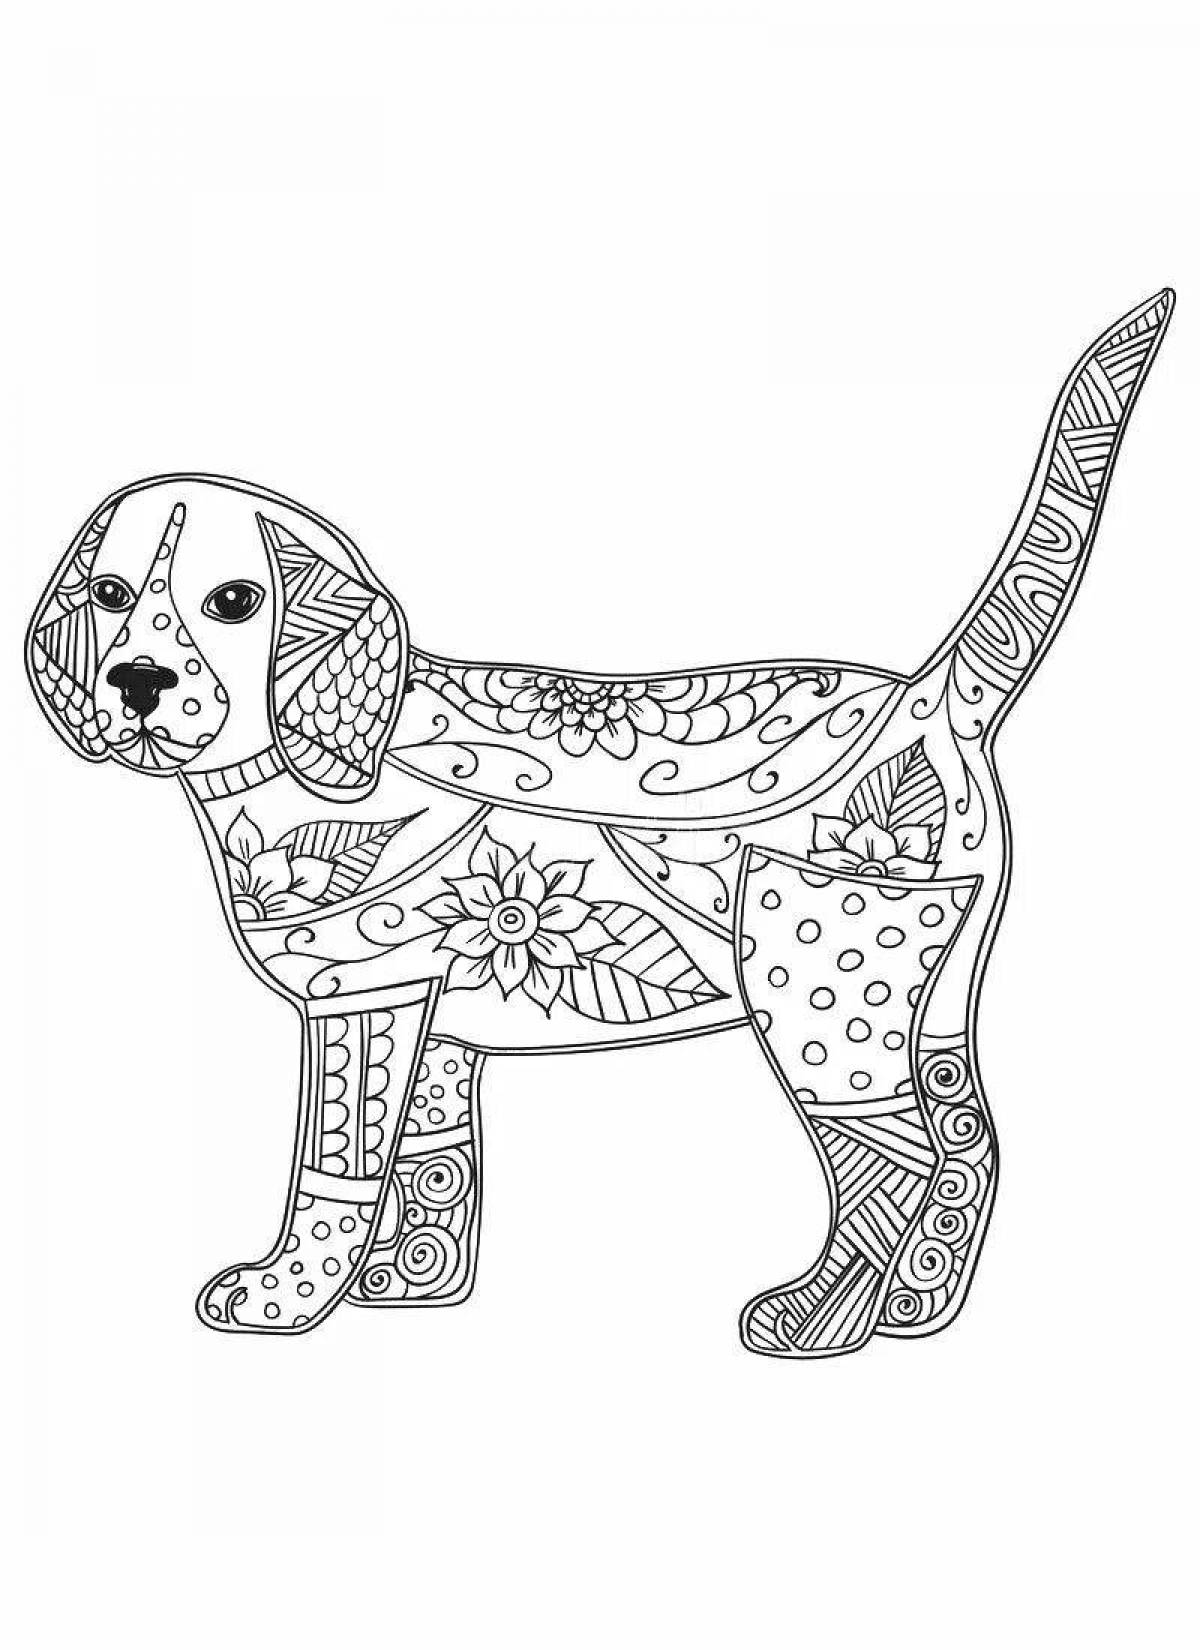 Calm dog coloring for adults